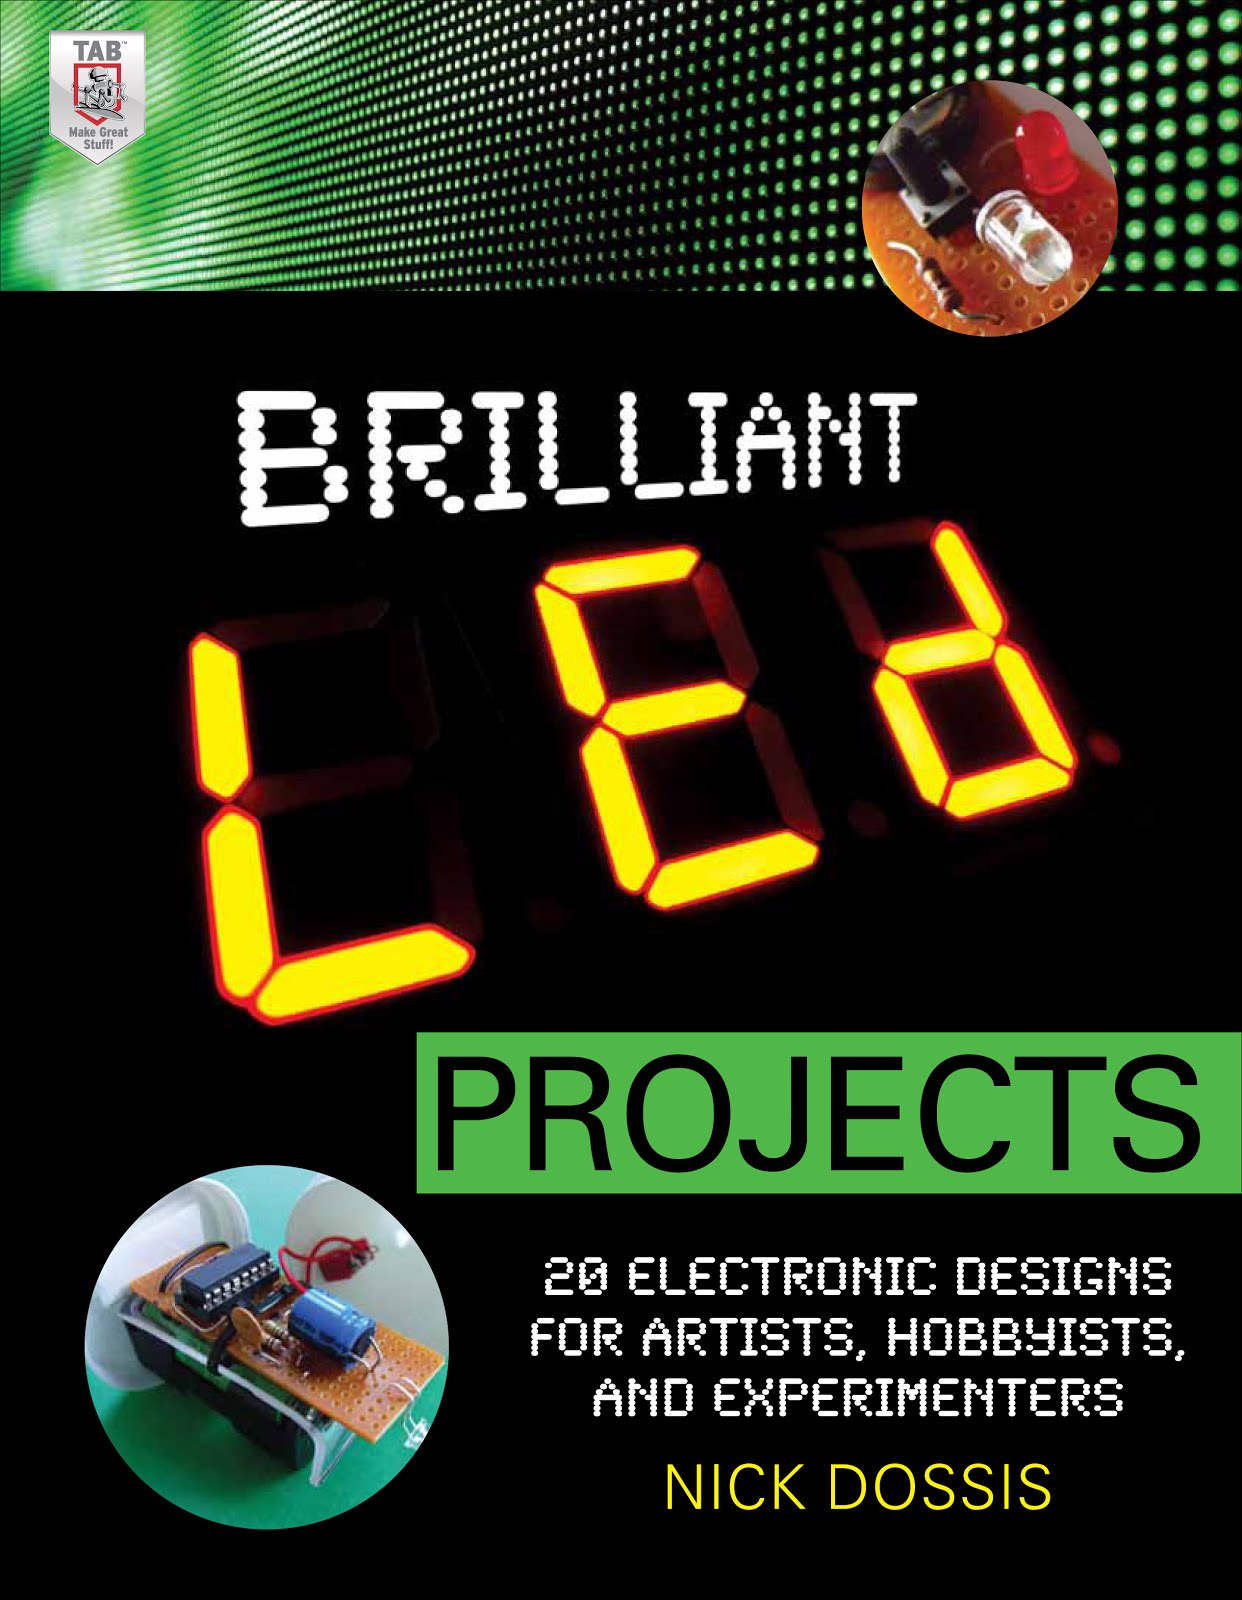 Brilliant LED Projects